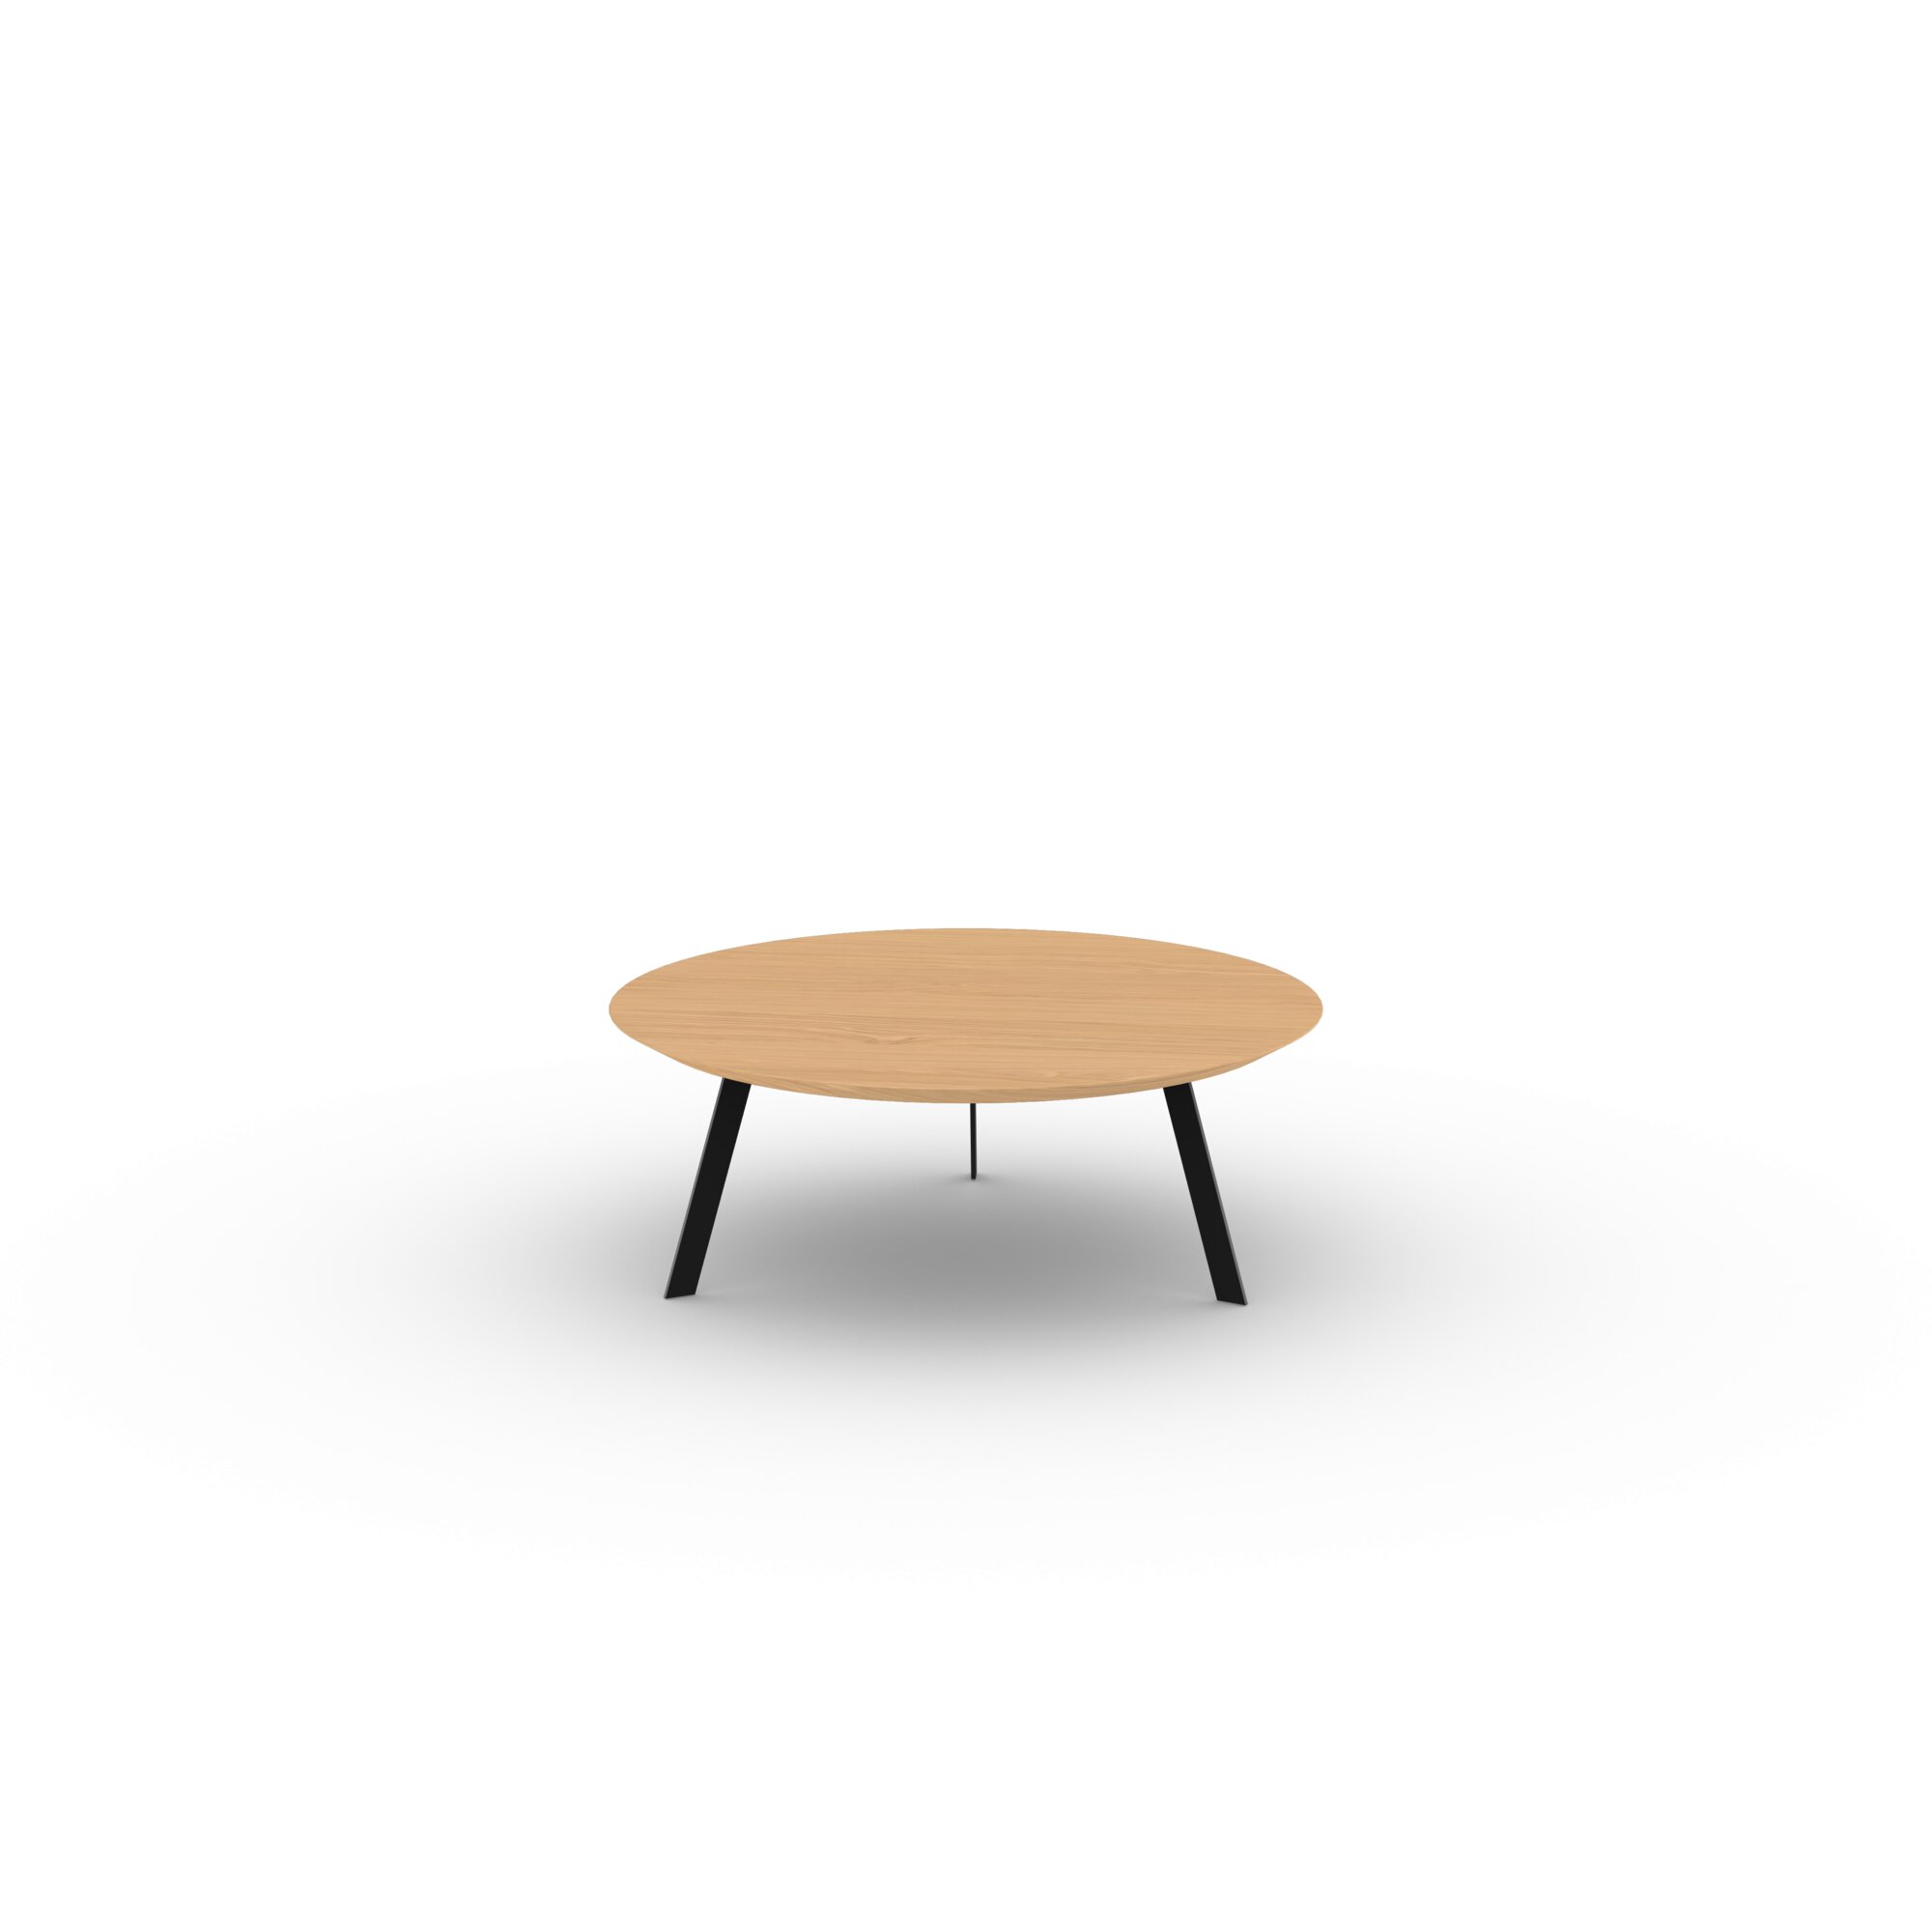 Design Coffee Table | New Co Coffee Table 90 Round Black | Oak hardwax oil natural 3062 | Studio HENK| 